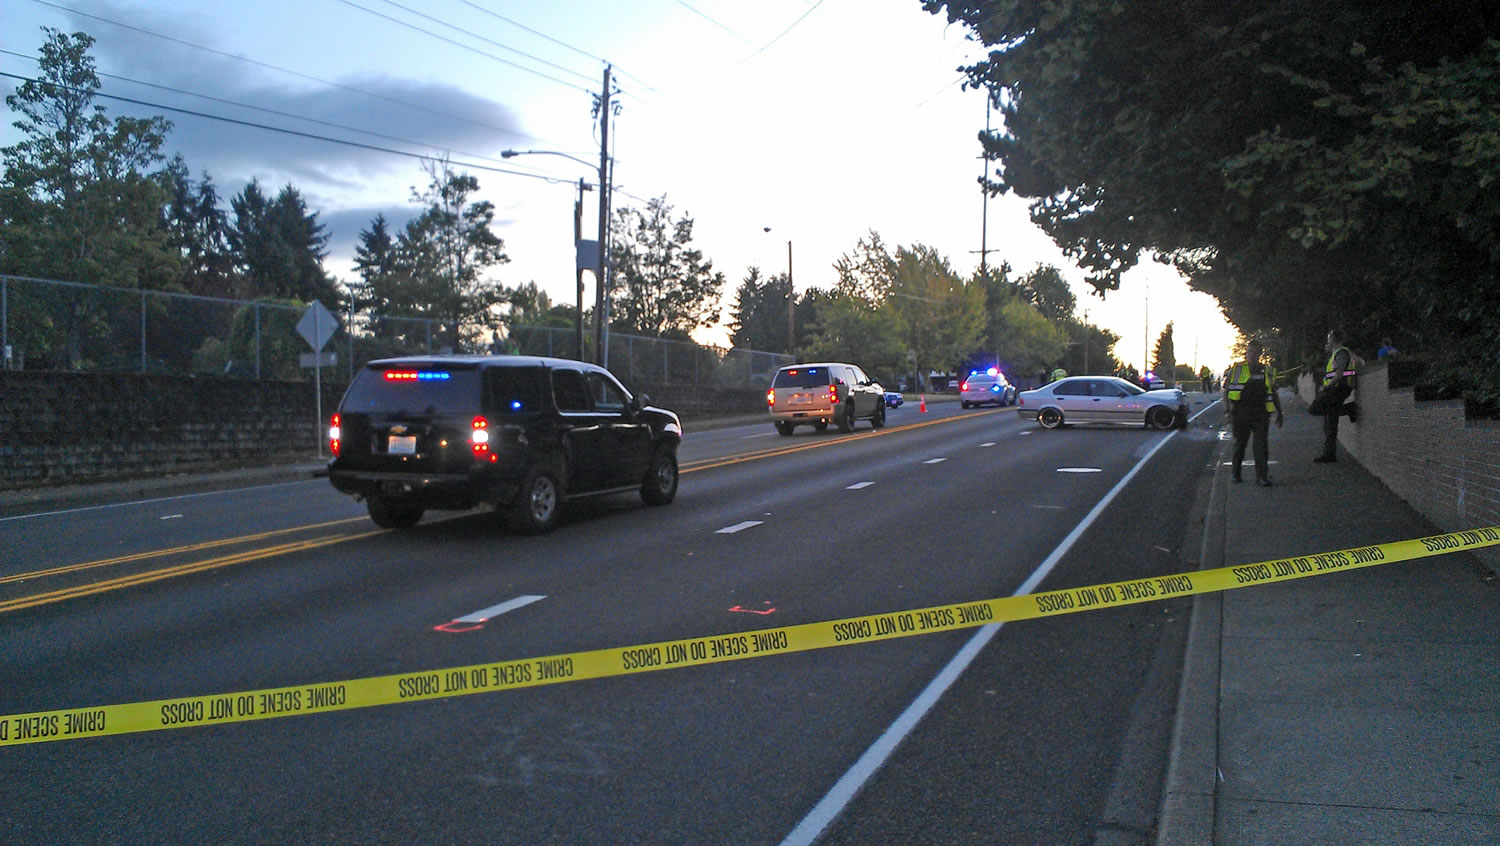 Clark County sheriff's deputies respond to the scene of a two-car crash that critically injured a teenage pedestrian Sunday evening on Northwest 99th Street just west of Columbia River High School.